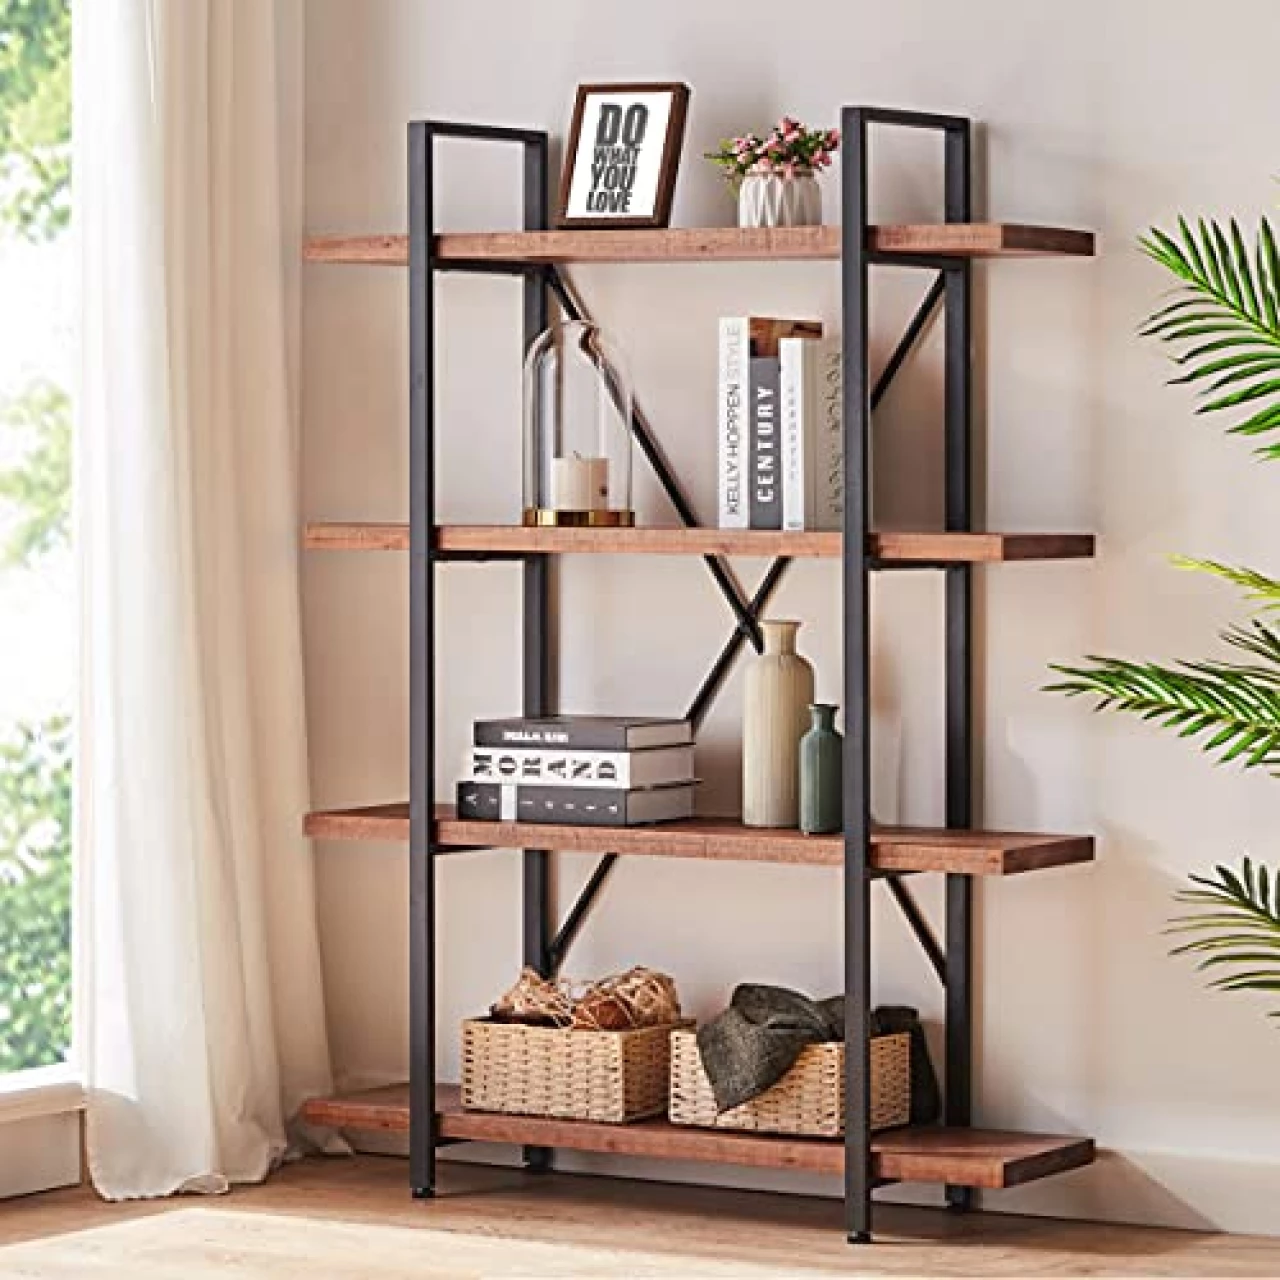 HSH 4 Tier Natural Real Wood Bookshelf, 4 Shelf Rustic Solid Wooden and Metal Bookcase, Farmhouse Open Vintage Industrial Etagere Book Shelf for Office Living Room Bedroom Storage, Distressed Brown